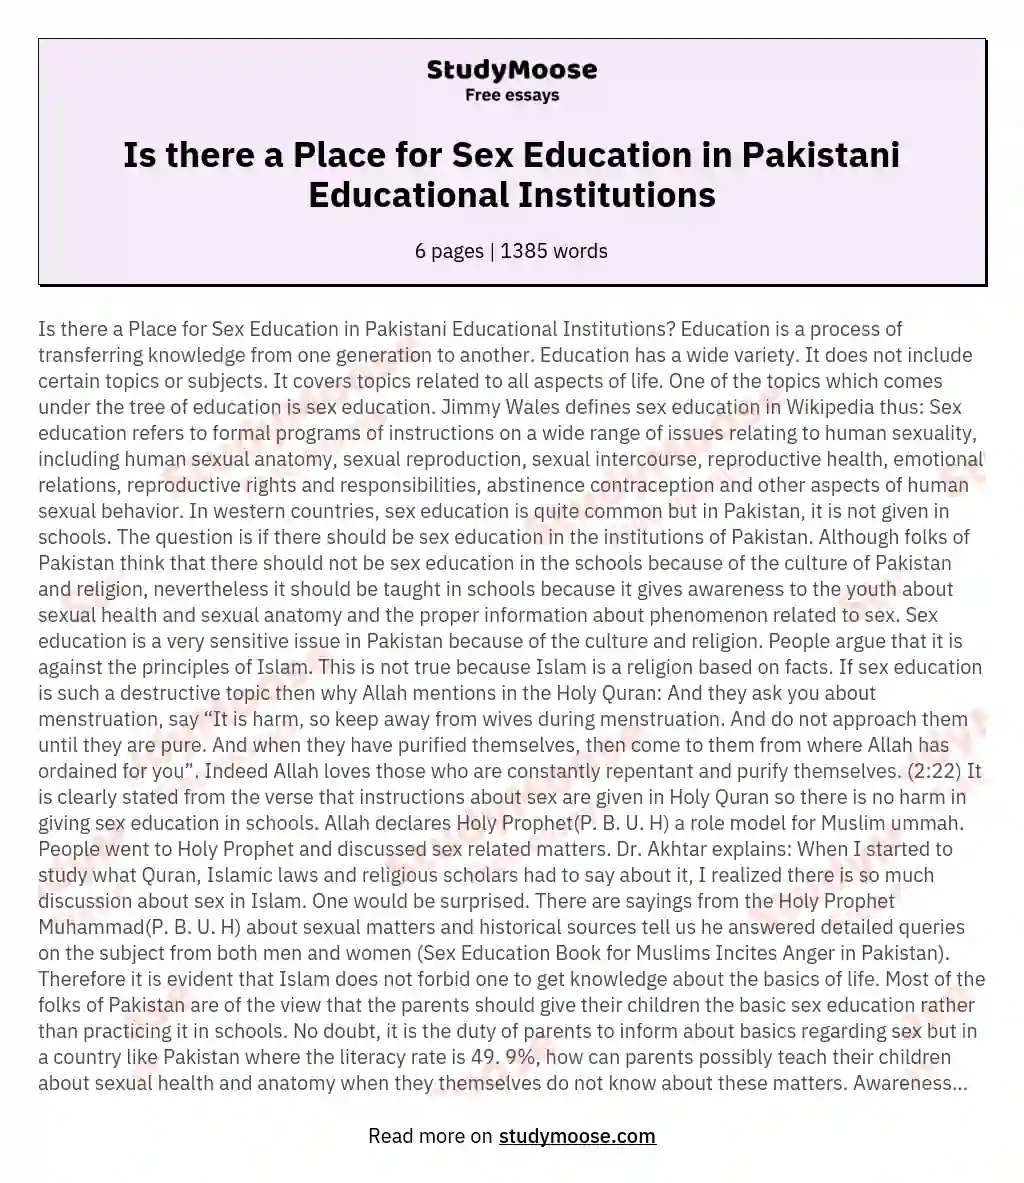 If there was no sex education in Faisalabad